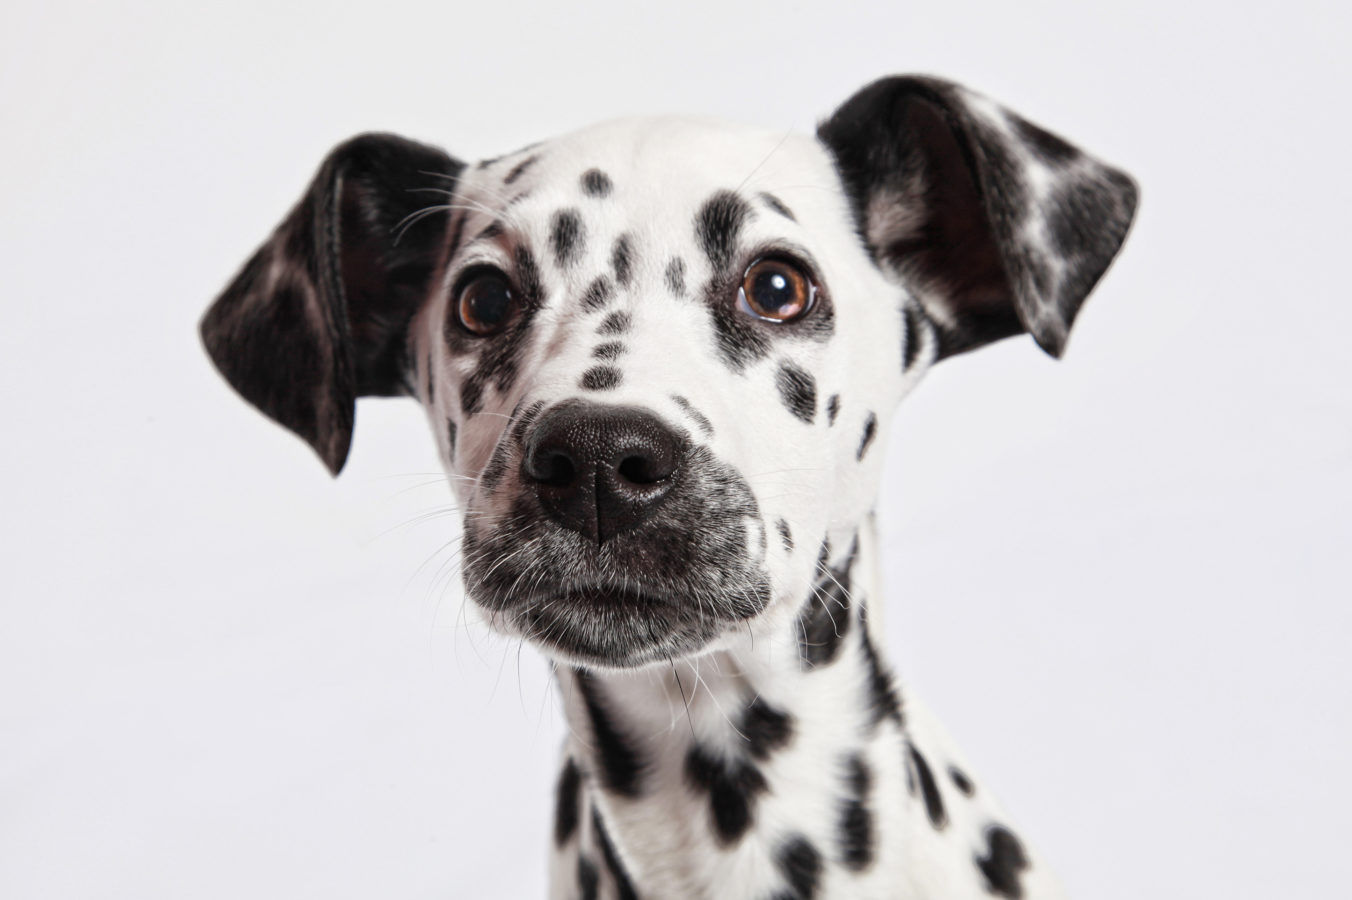 The 10 cutest dog breeds in the world (according to science)